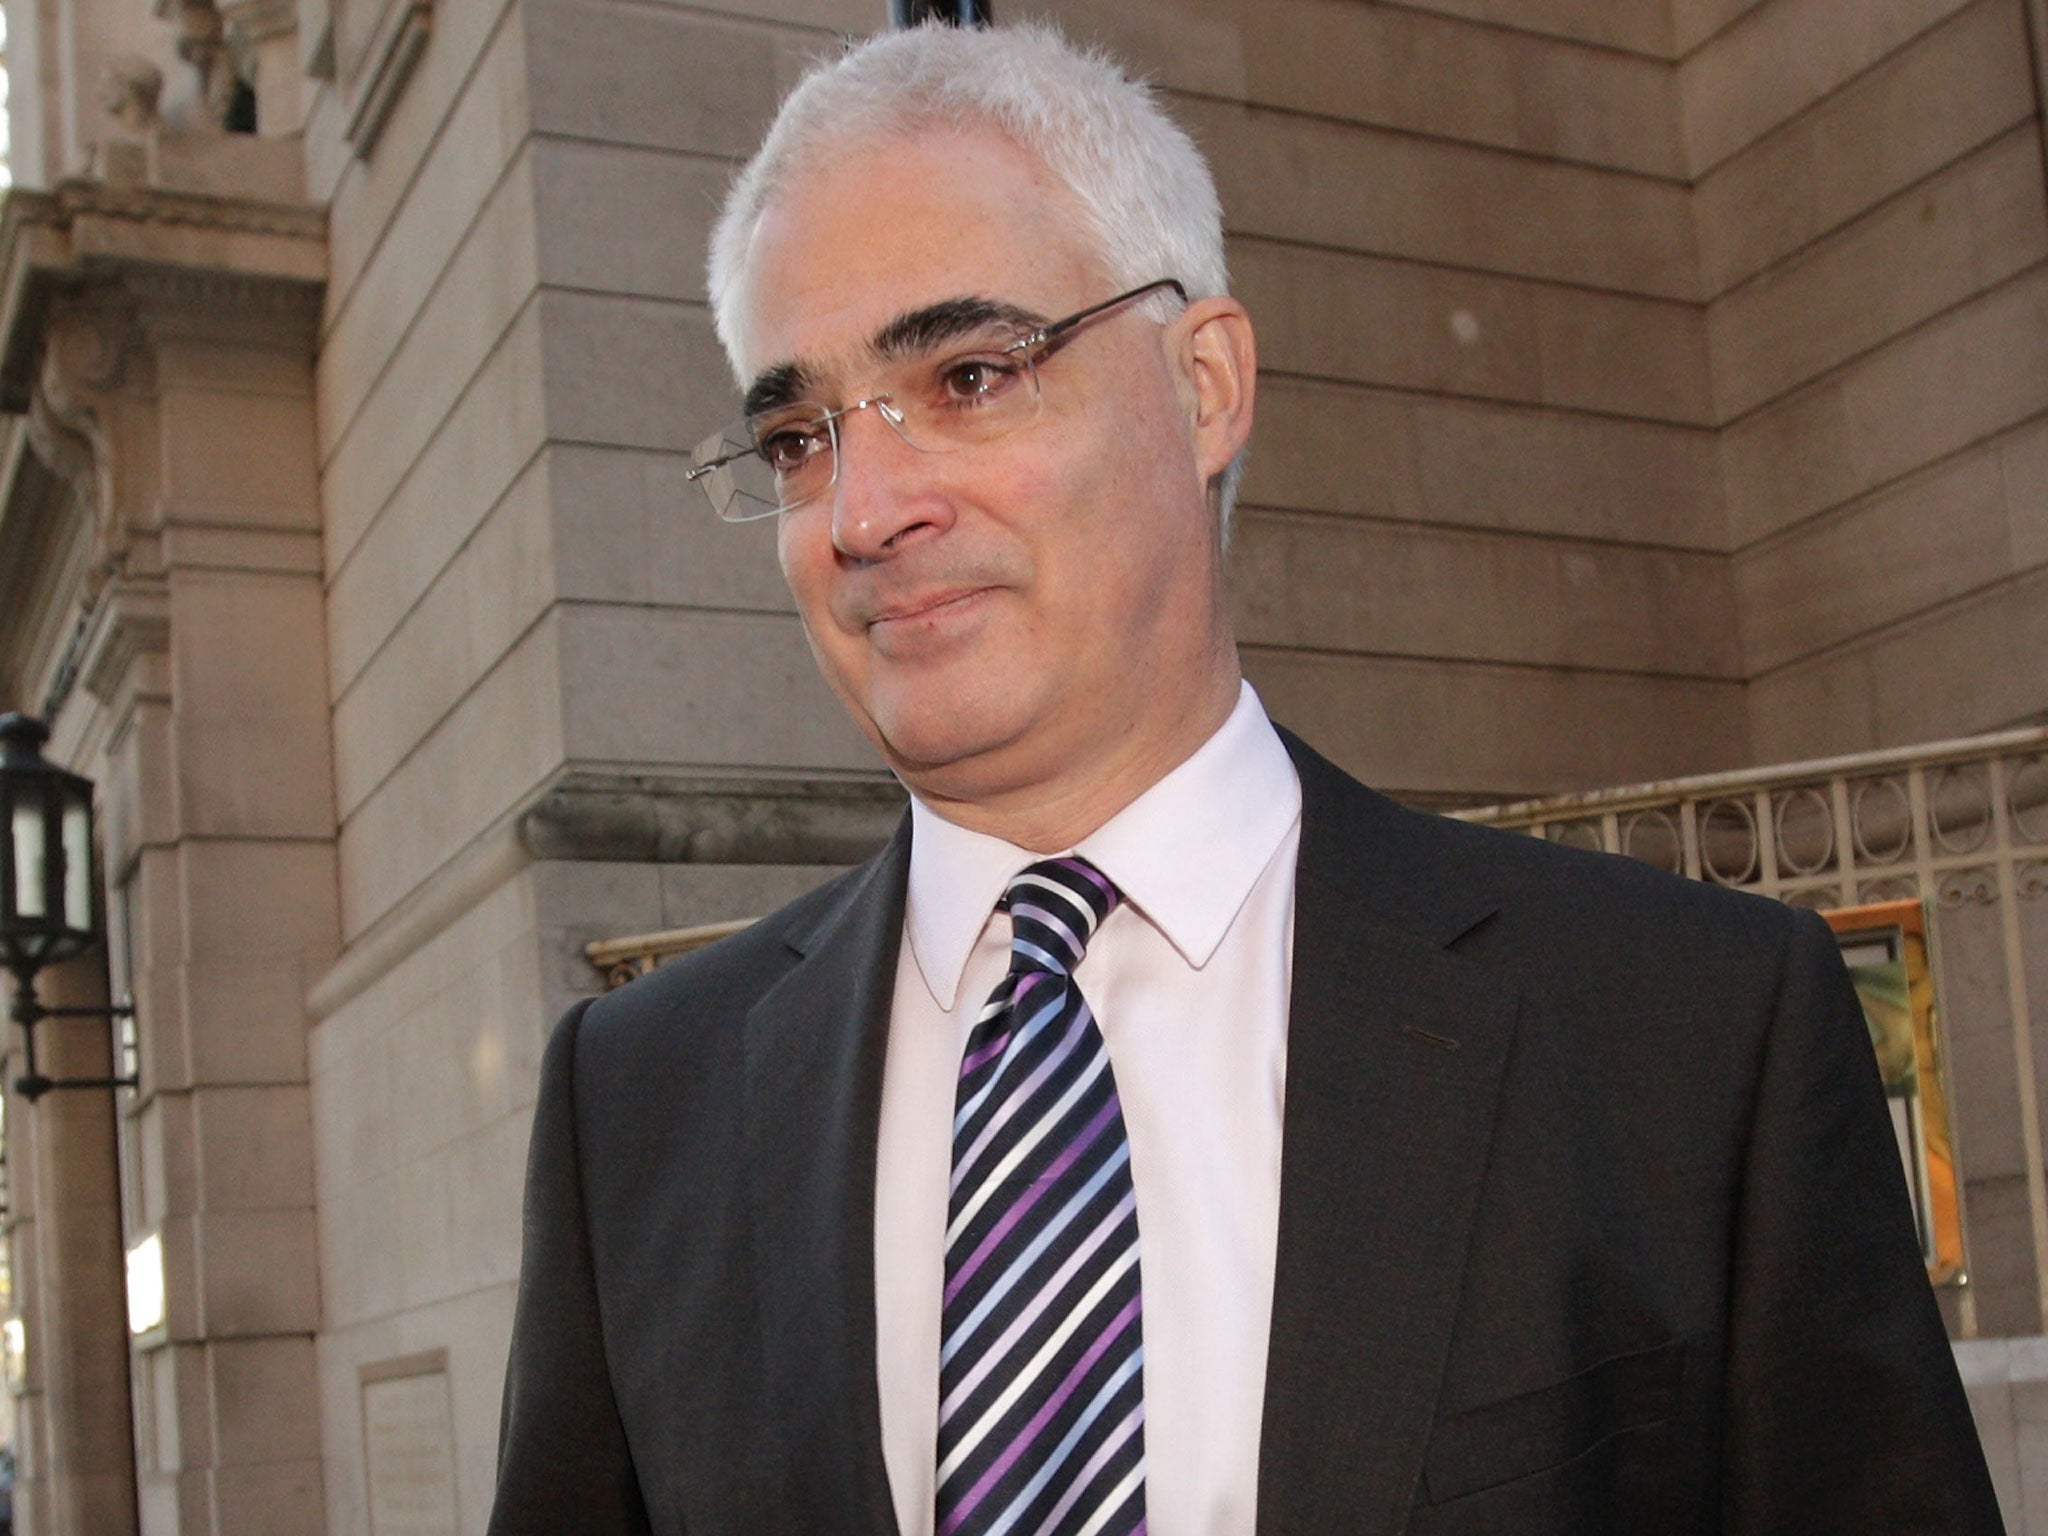 Alistair Darling will promise "change and progress " for Scotland within the UK